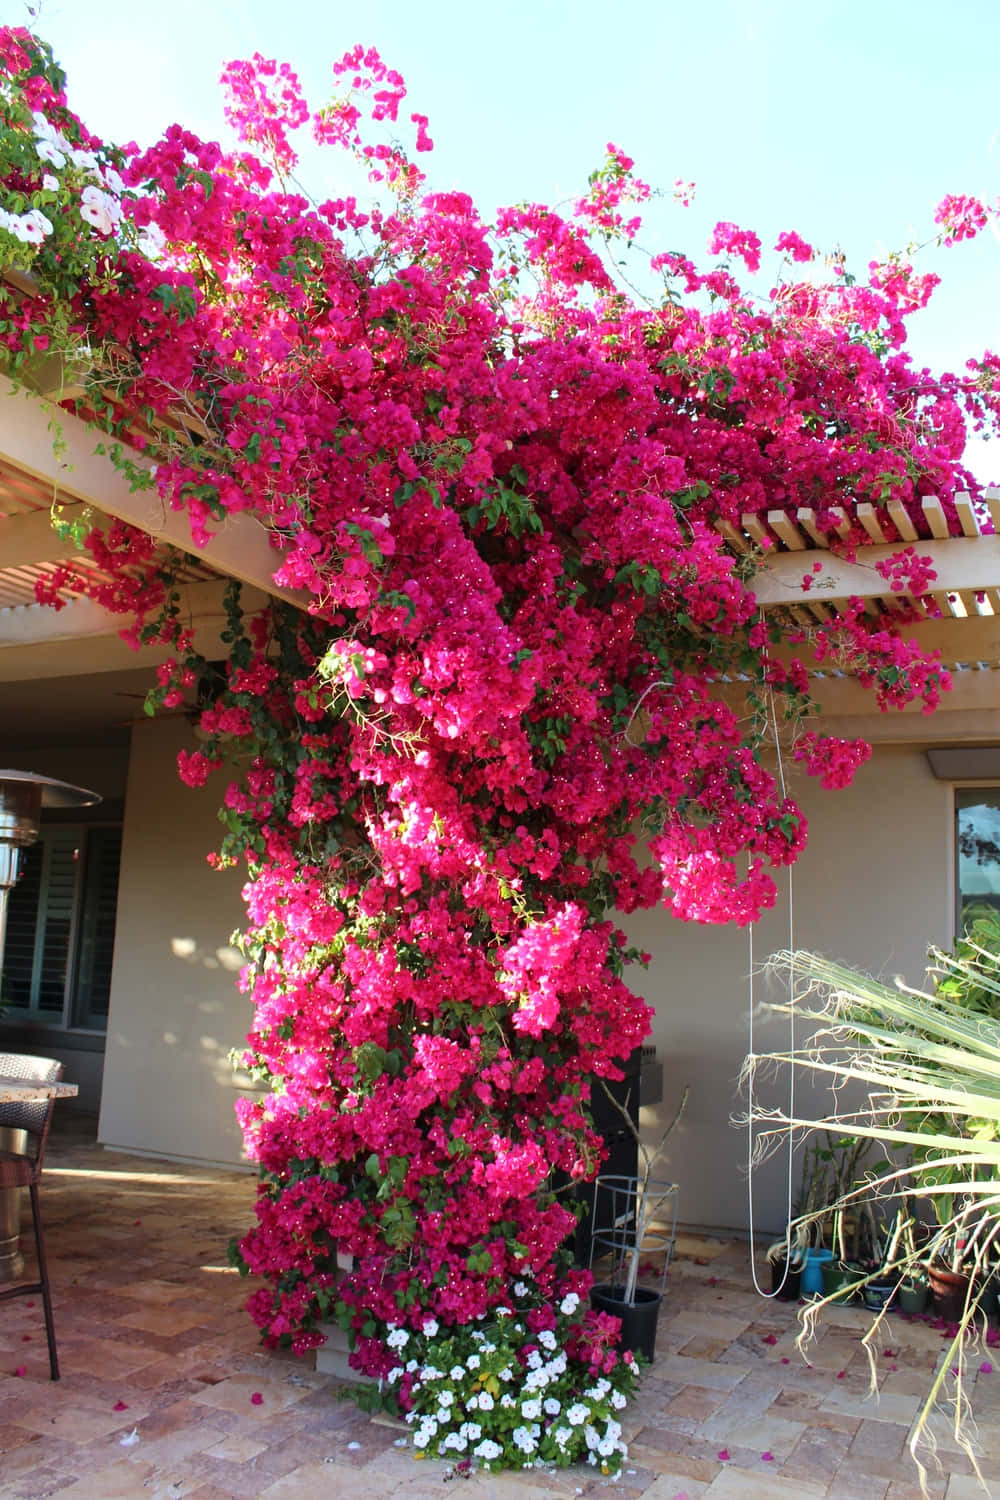 Tropical beauty in full bloom as vibrant bougainvillea climbs up and over a green fence